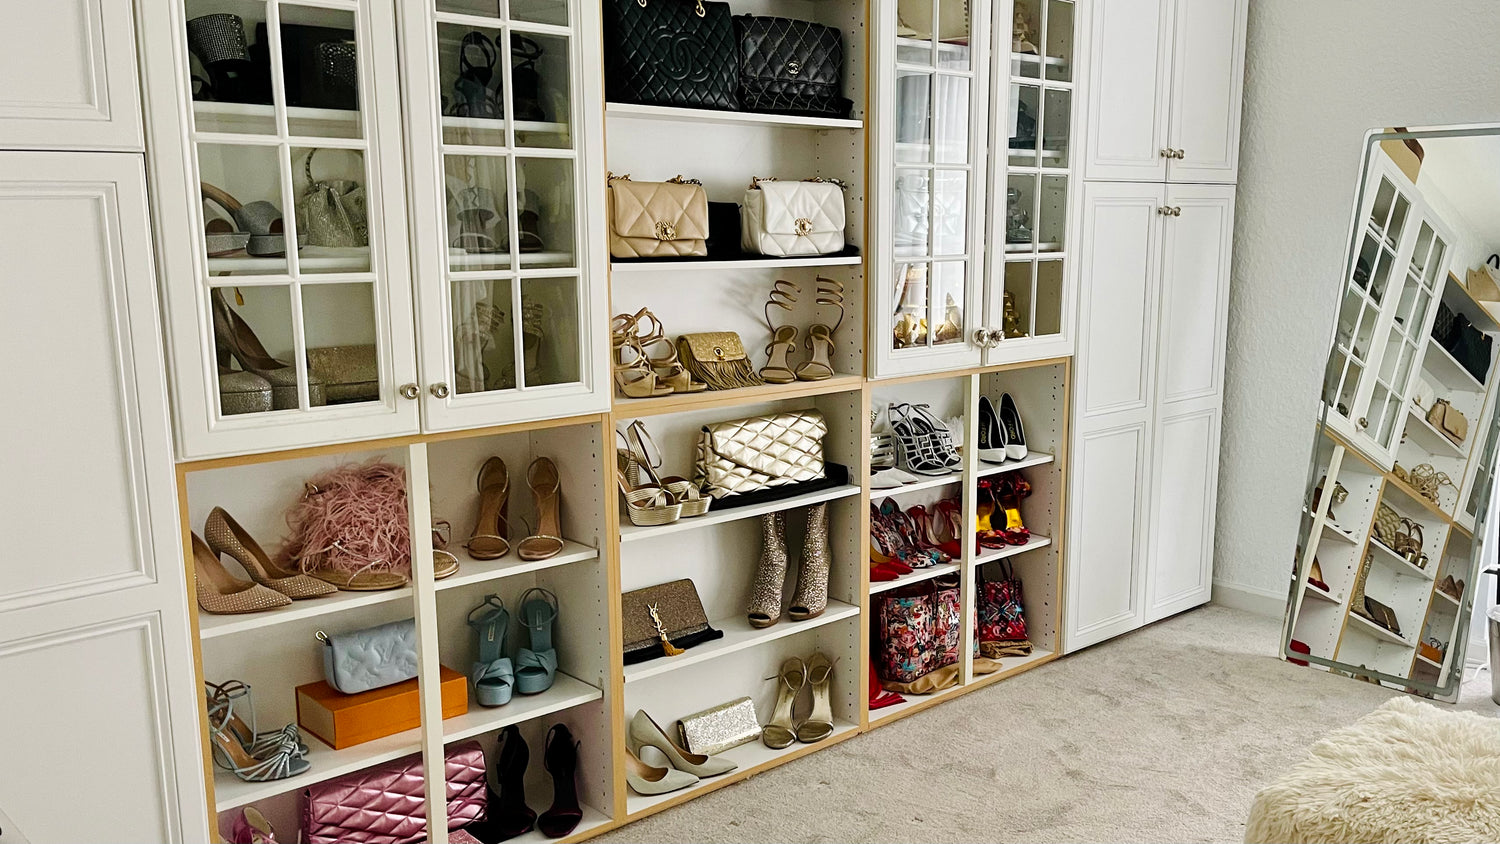 Closet Confessions: 10 Fabulous Tips to Spring Clean Your Wardrobe with Style!